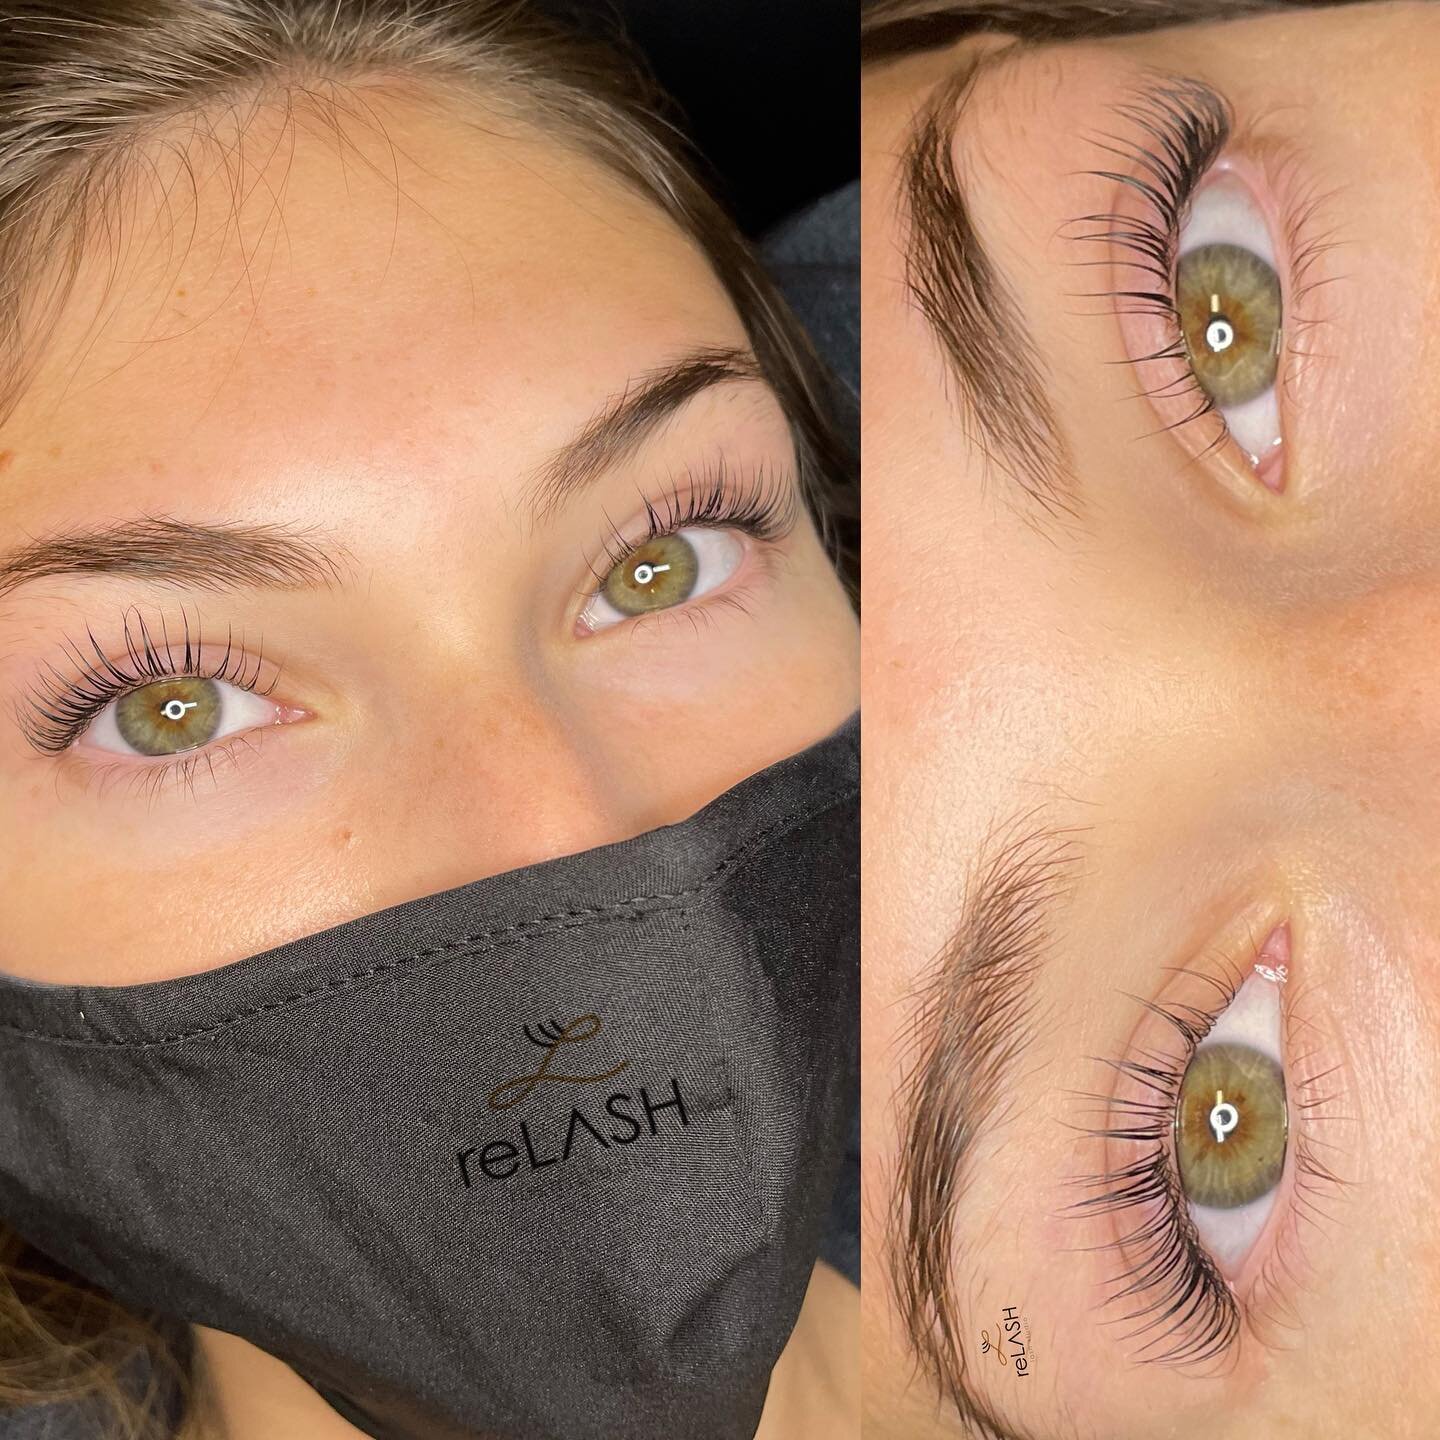 Keratin Lash Lift + Lash Tint 🤩

Have you been wanting to try this service and have questions? Feel free to ask in the comments 😁

Are you a lash or brow artist looking to provide Lash and Brow services at your salon studio? We carry everything you